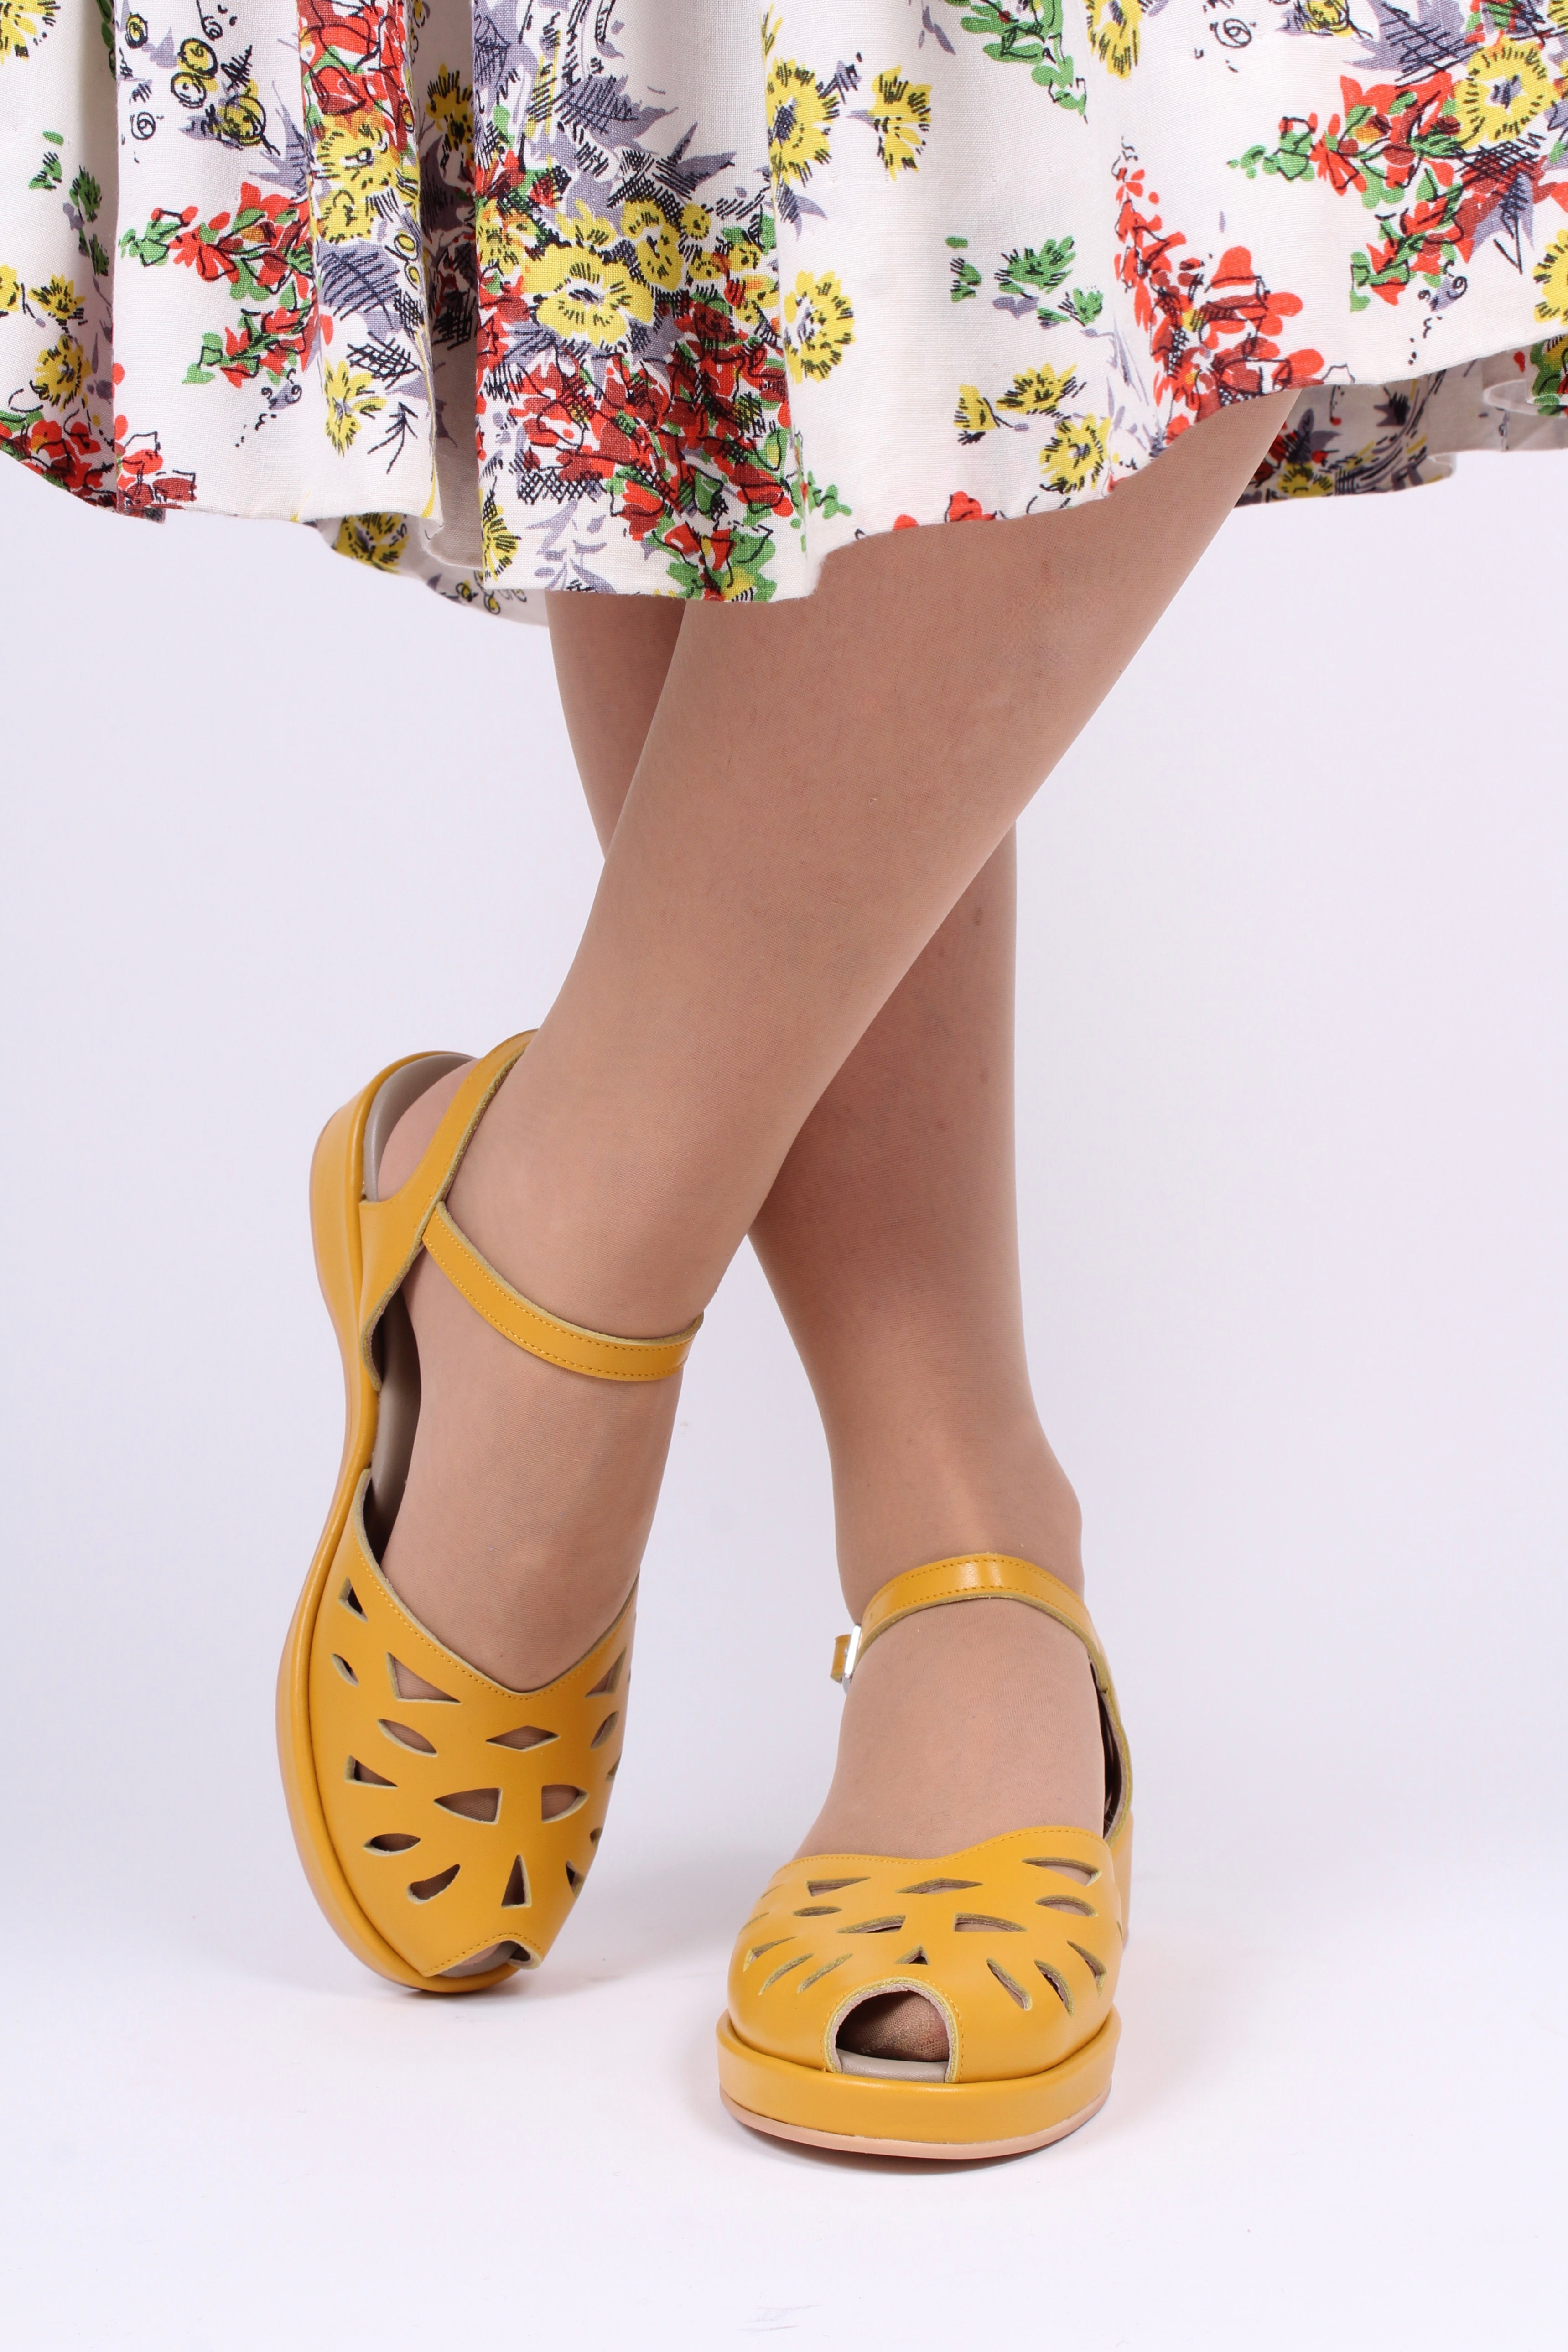 1940s / 50s style summer sandals /  wedges - Mustard Yellow - Sidse